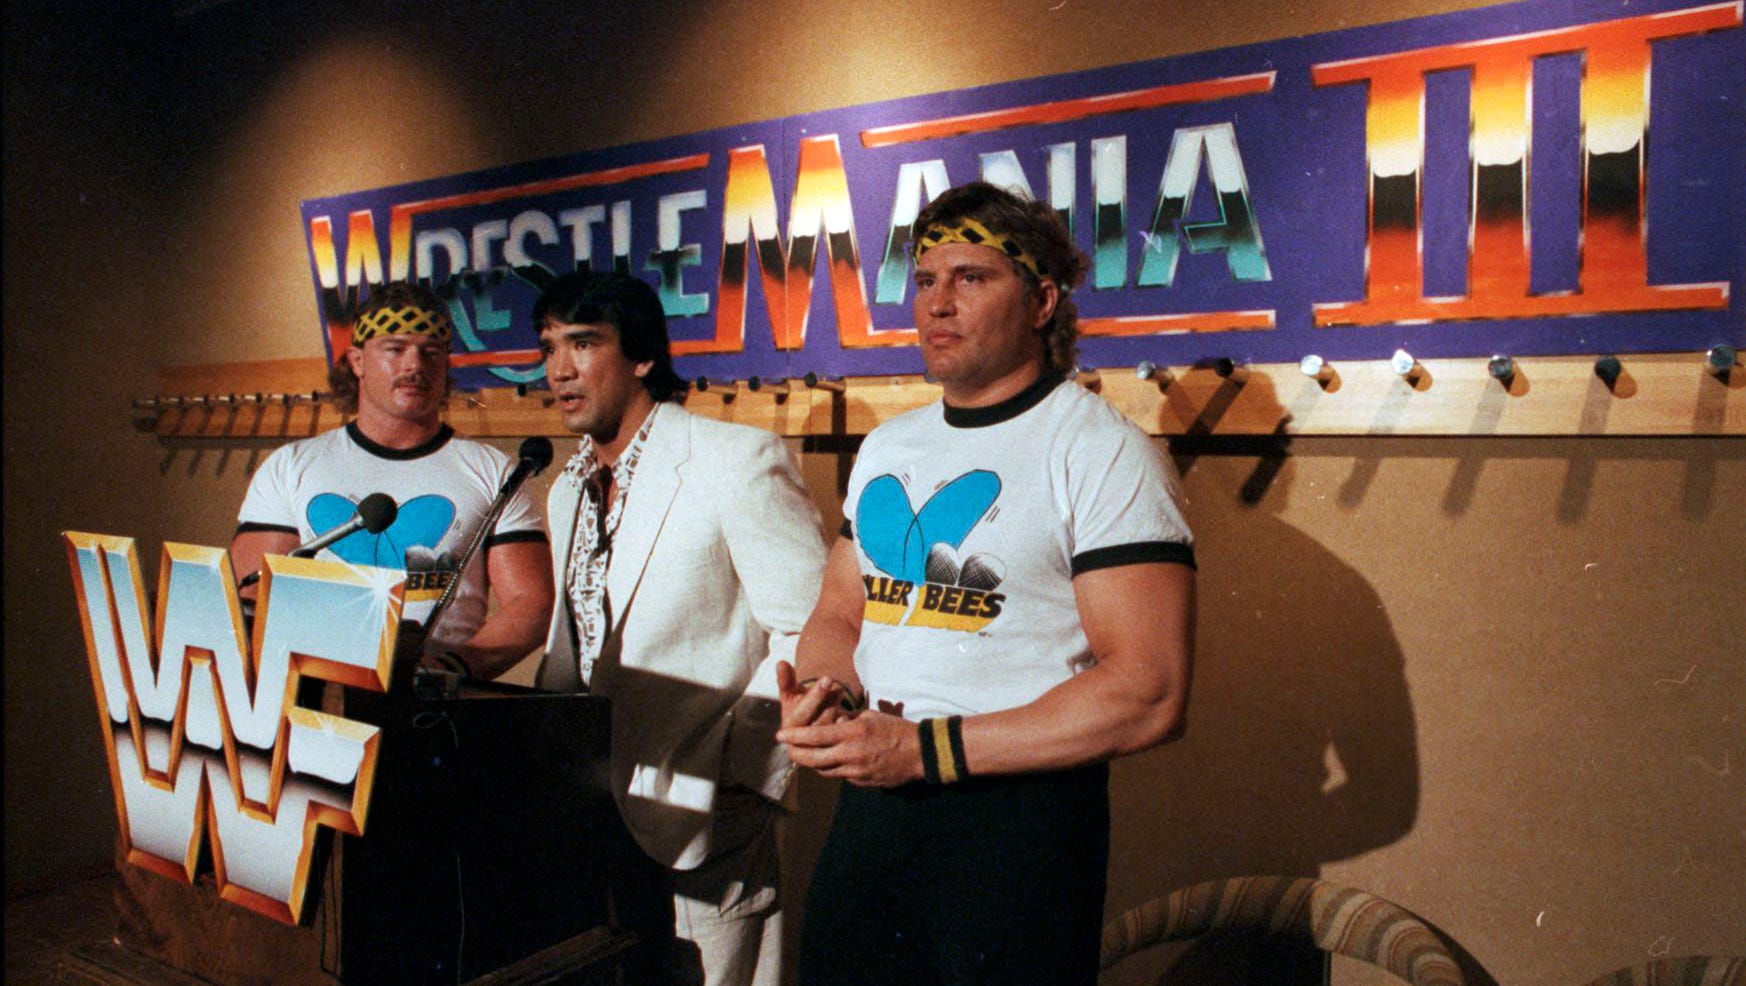 Ricky "The Dragon" Steamboat, flanked by the Killer Bees, B. Brian Blair, left, and Jim Brunzell, right, speaks at a press conference ahead of WrestleMania III.